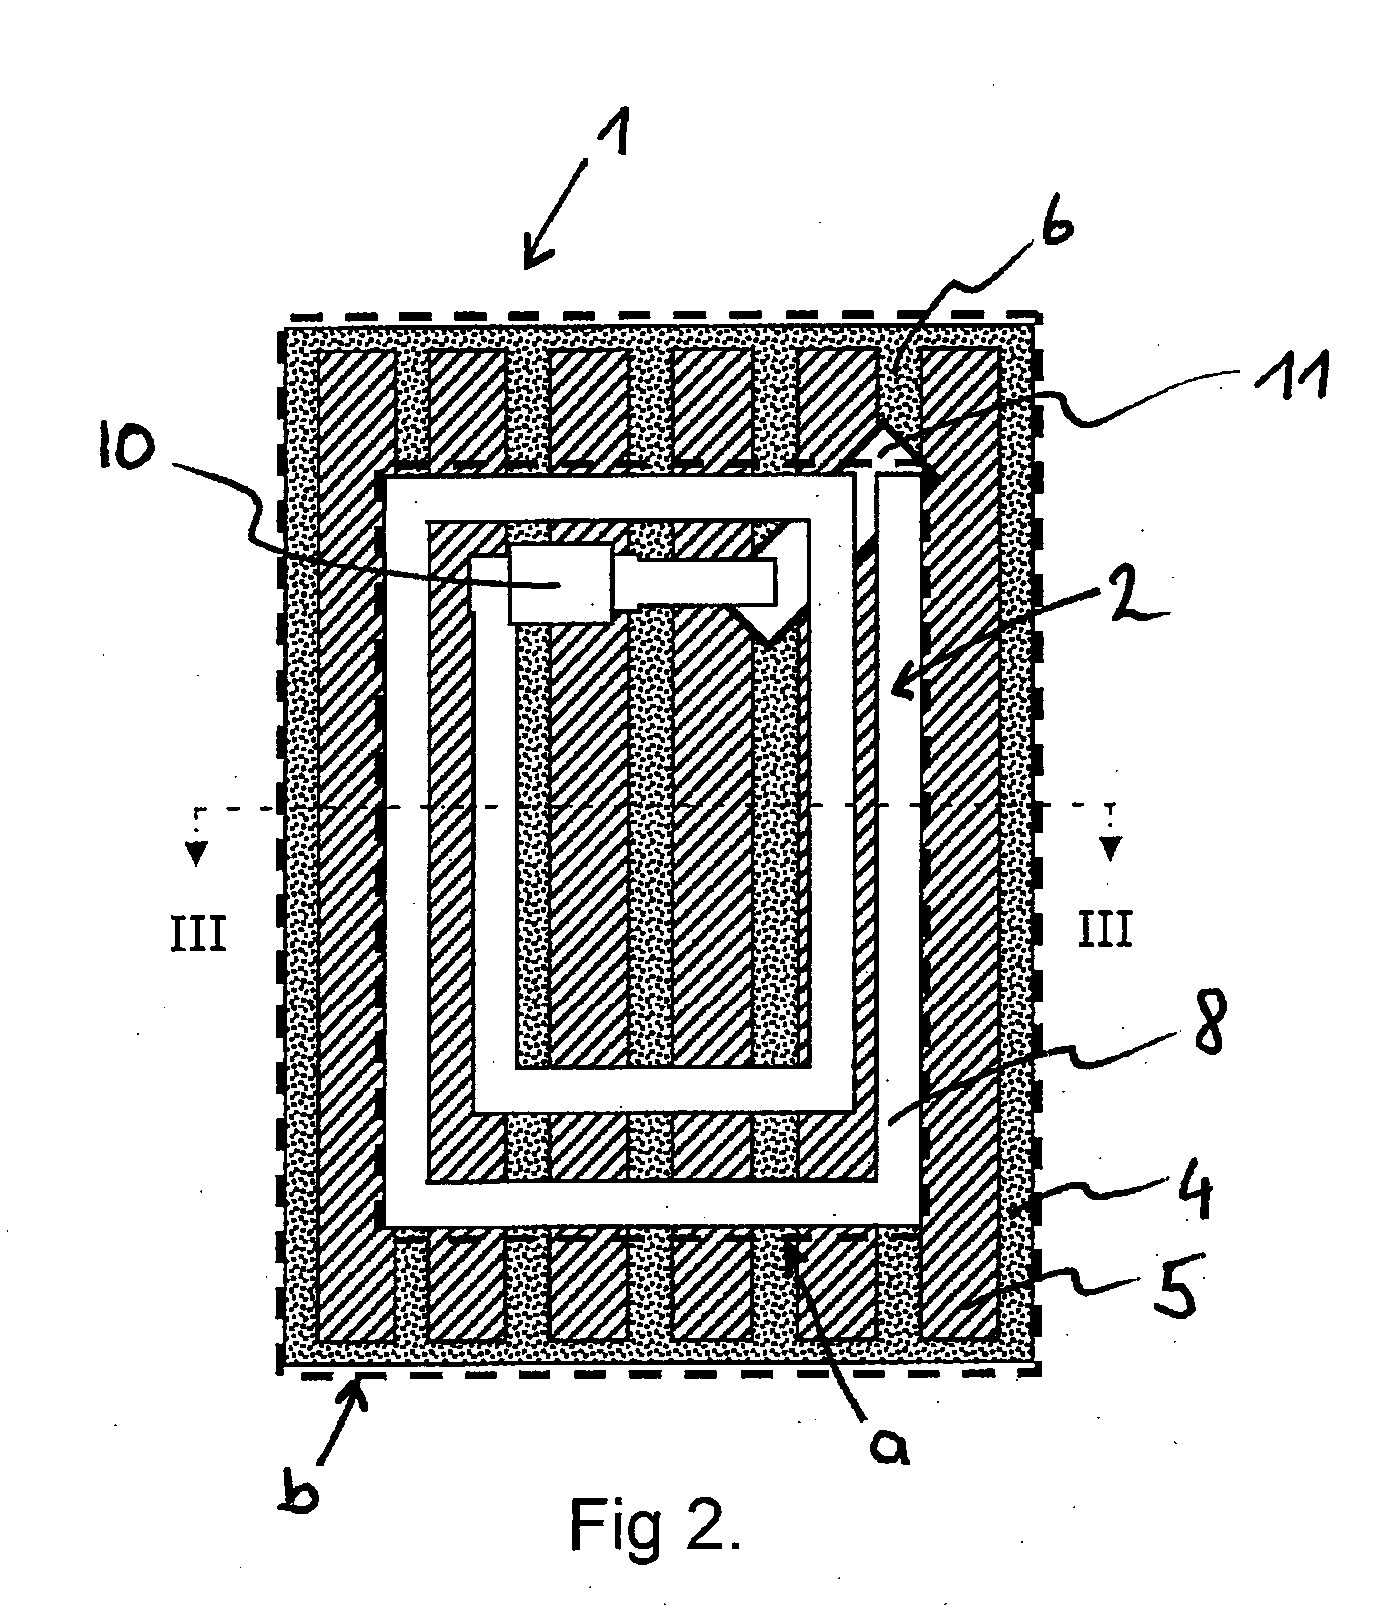 Apparatus, method and use for screening the magnetic field of an RFID transponder